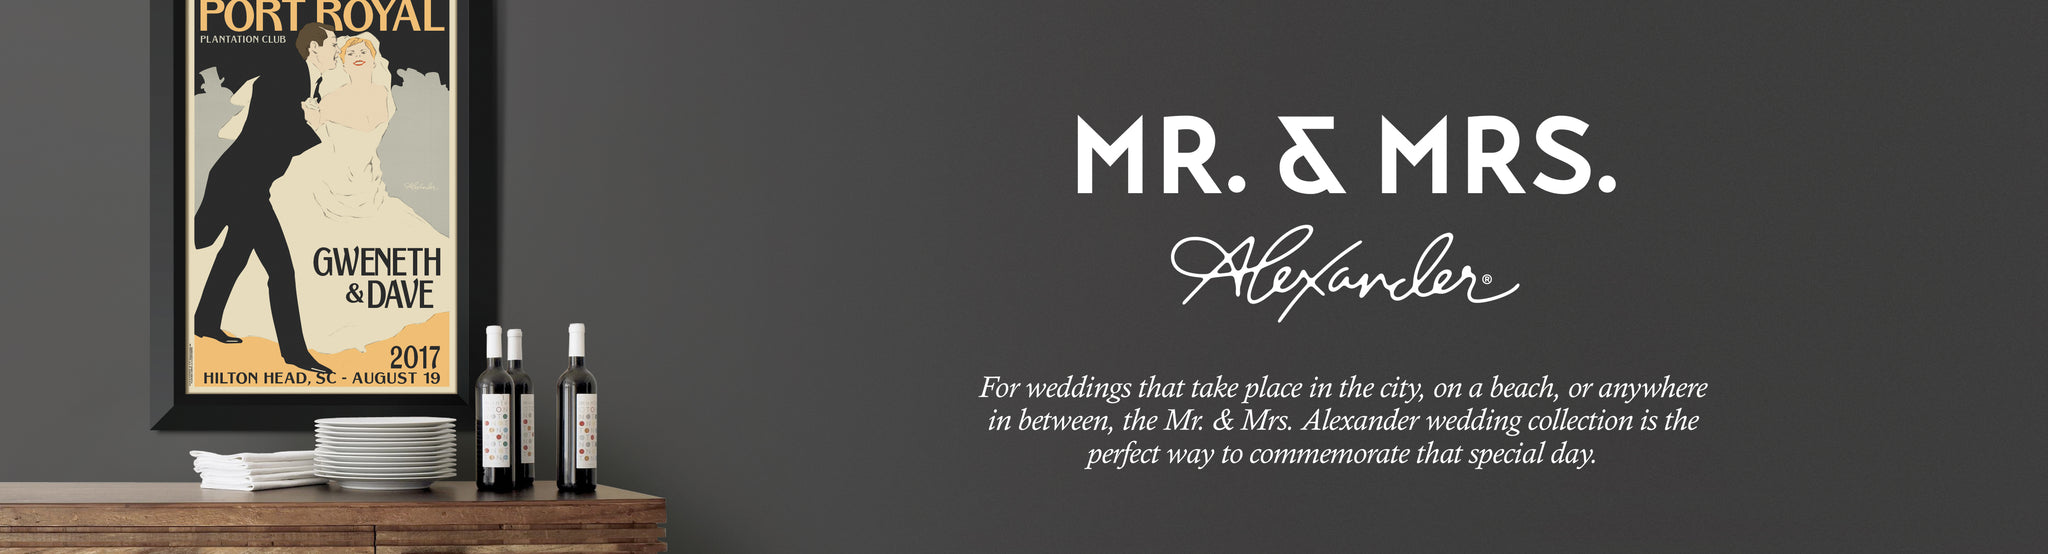 For weddings that take place in the city, on a beach, or anywhere in between, personalized artwork from the Mr & Mrs Alexander collection is the perfect unique wedding gift.